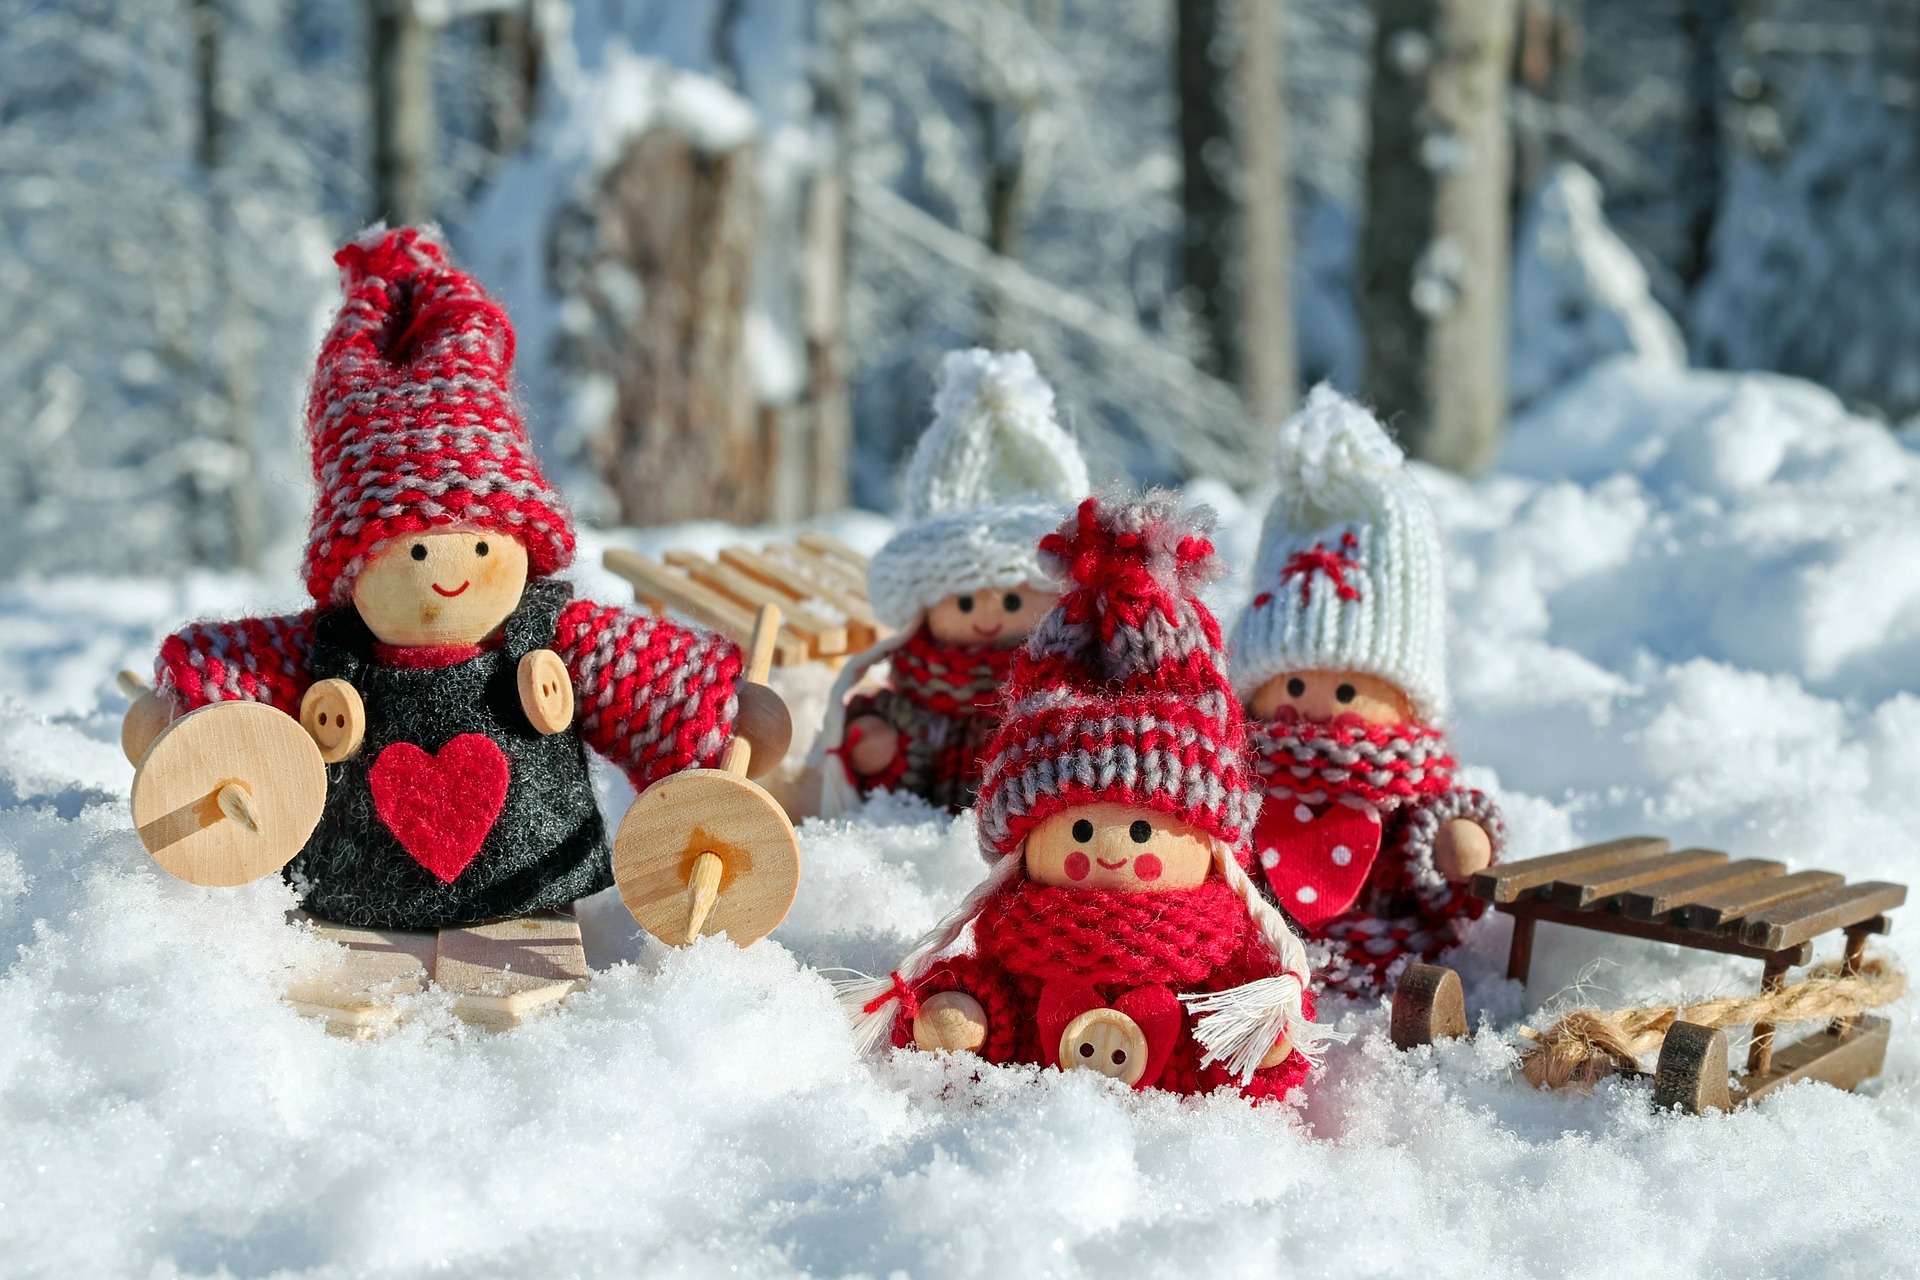 An image of little cute wooden dolls wearing wool hats and sat in the snow